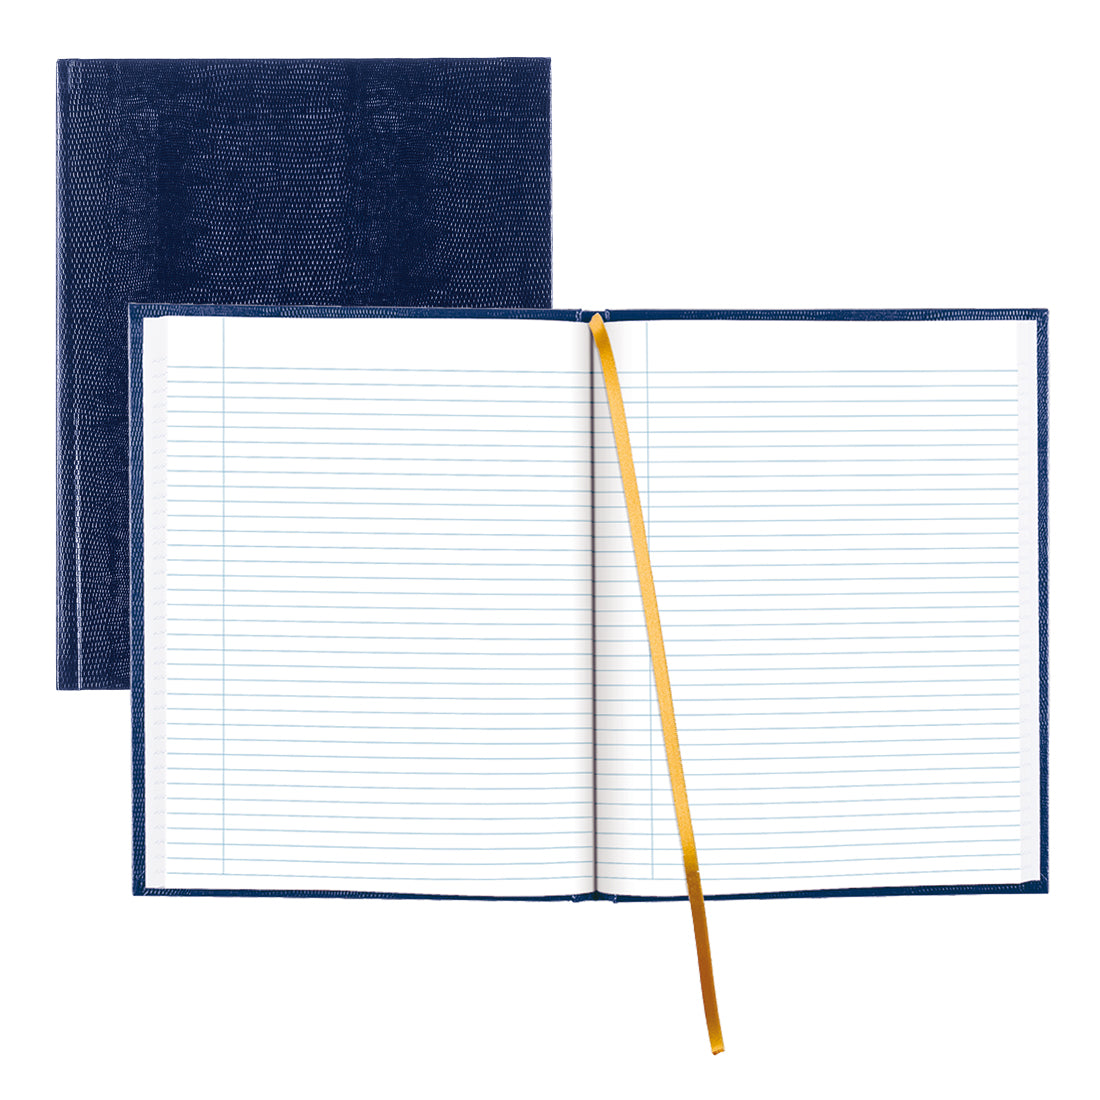 Blueline Executive Hardcover Journal, 8.5" x 10.75", College Ruled, Black, 150 Pages (A10)